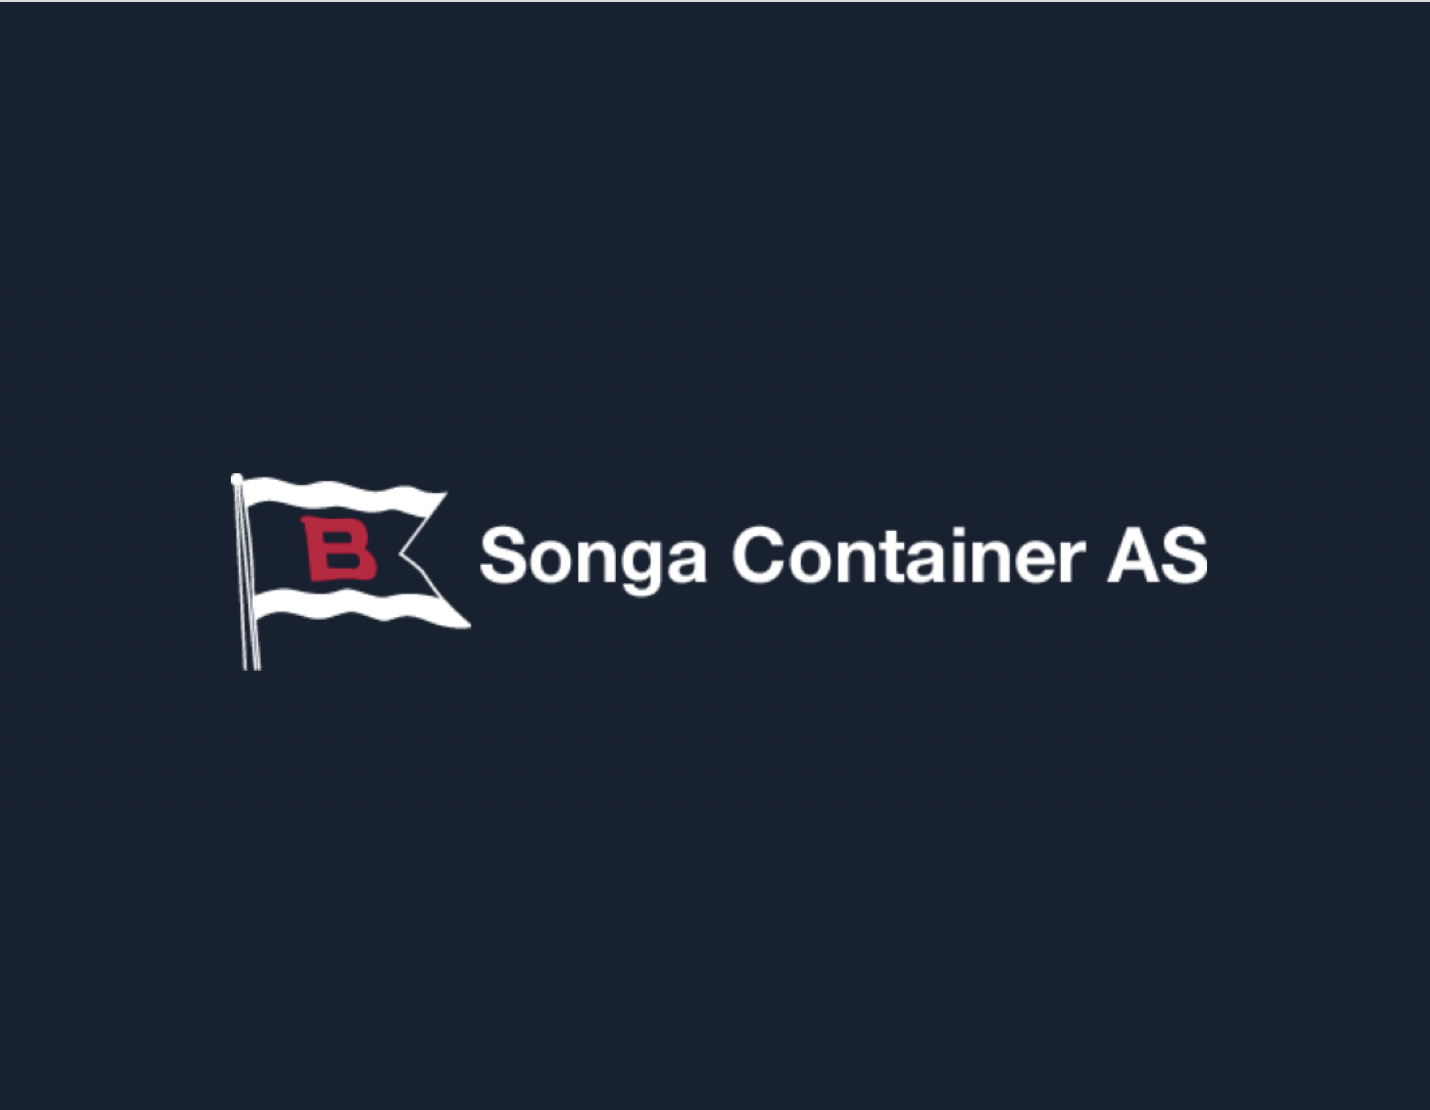 SONGA CONTAINER AS